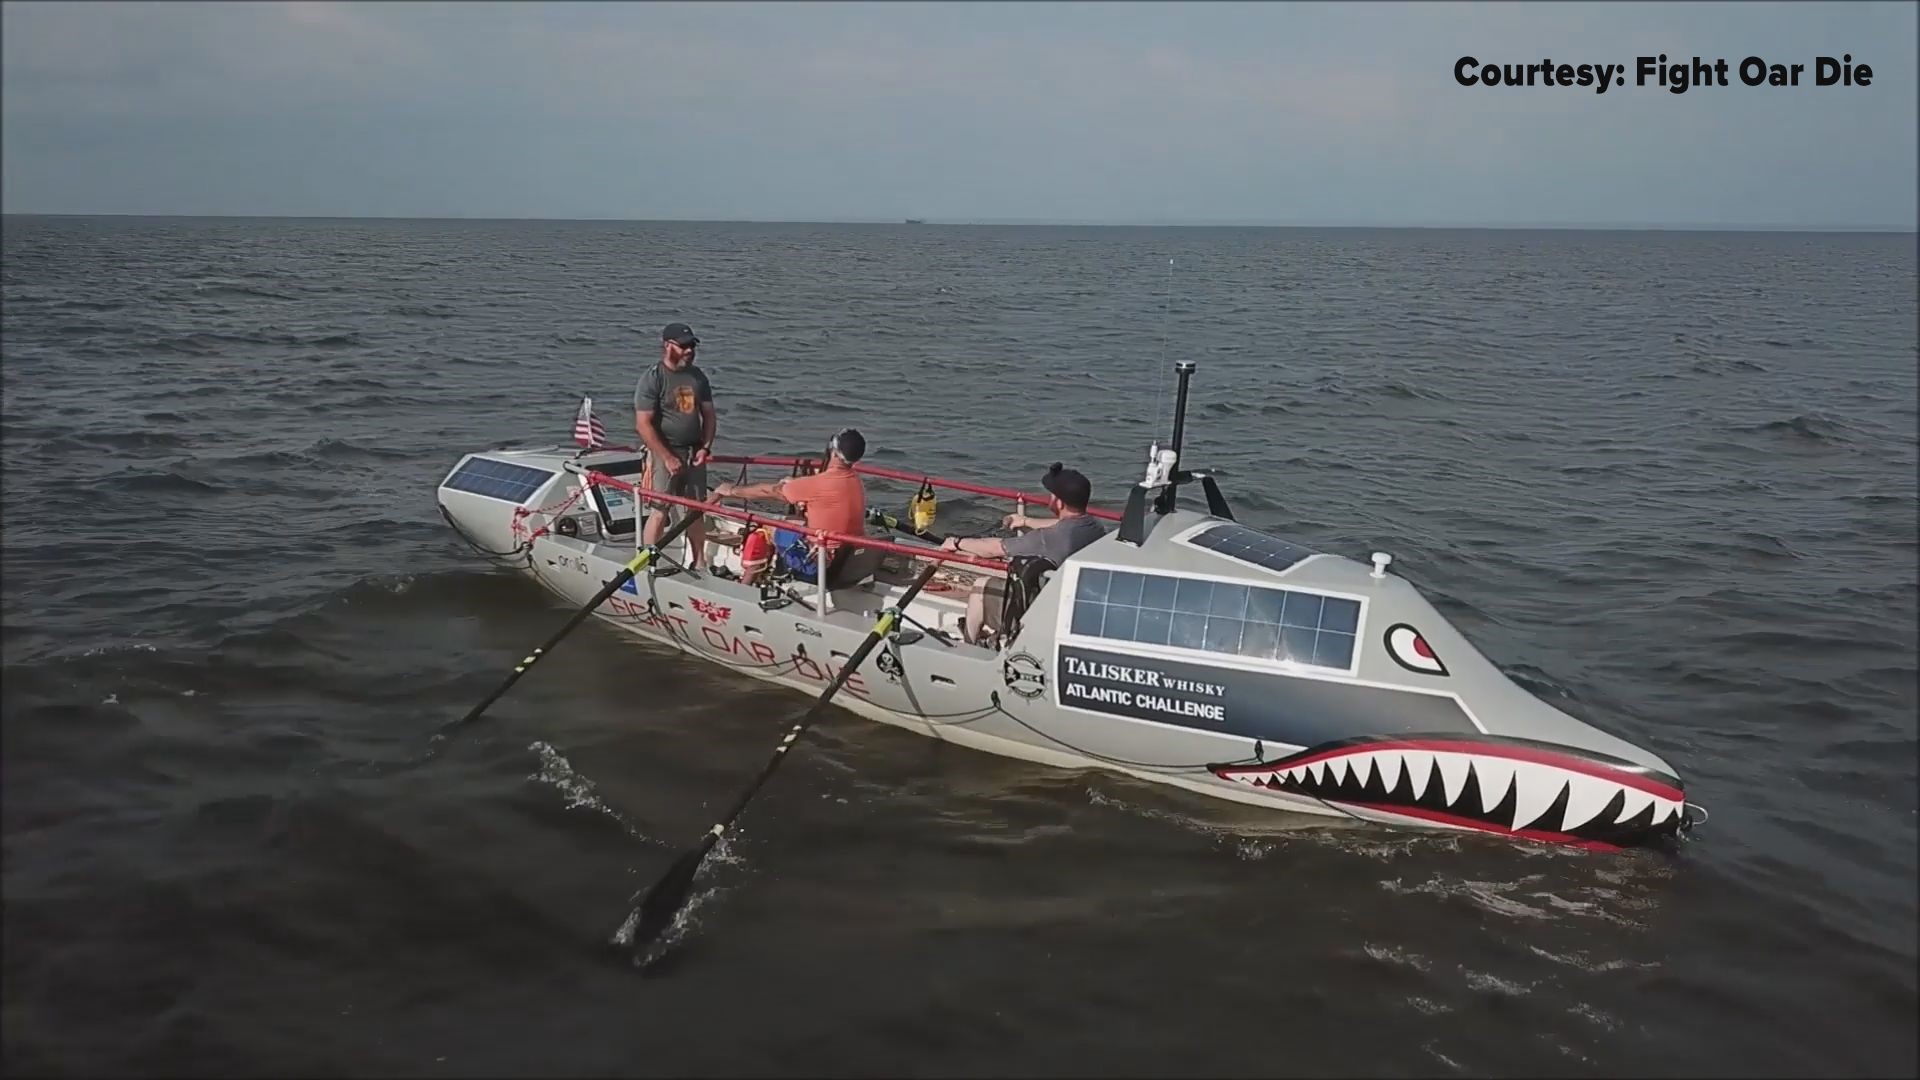 It will take the team between 45 and 60 days to row between the Canary Islands and Antigua.